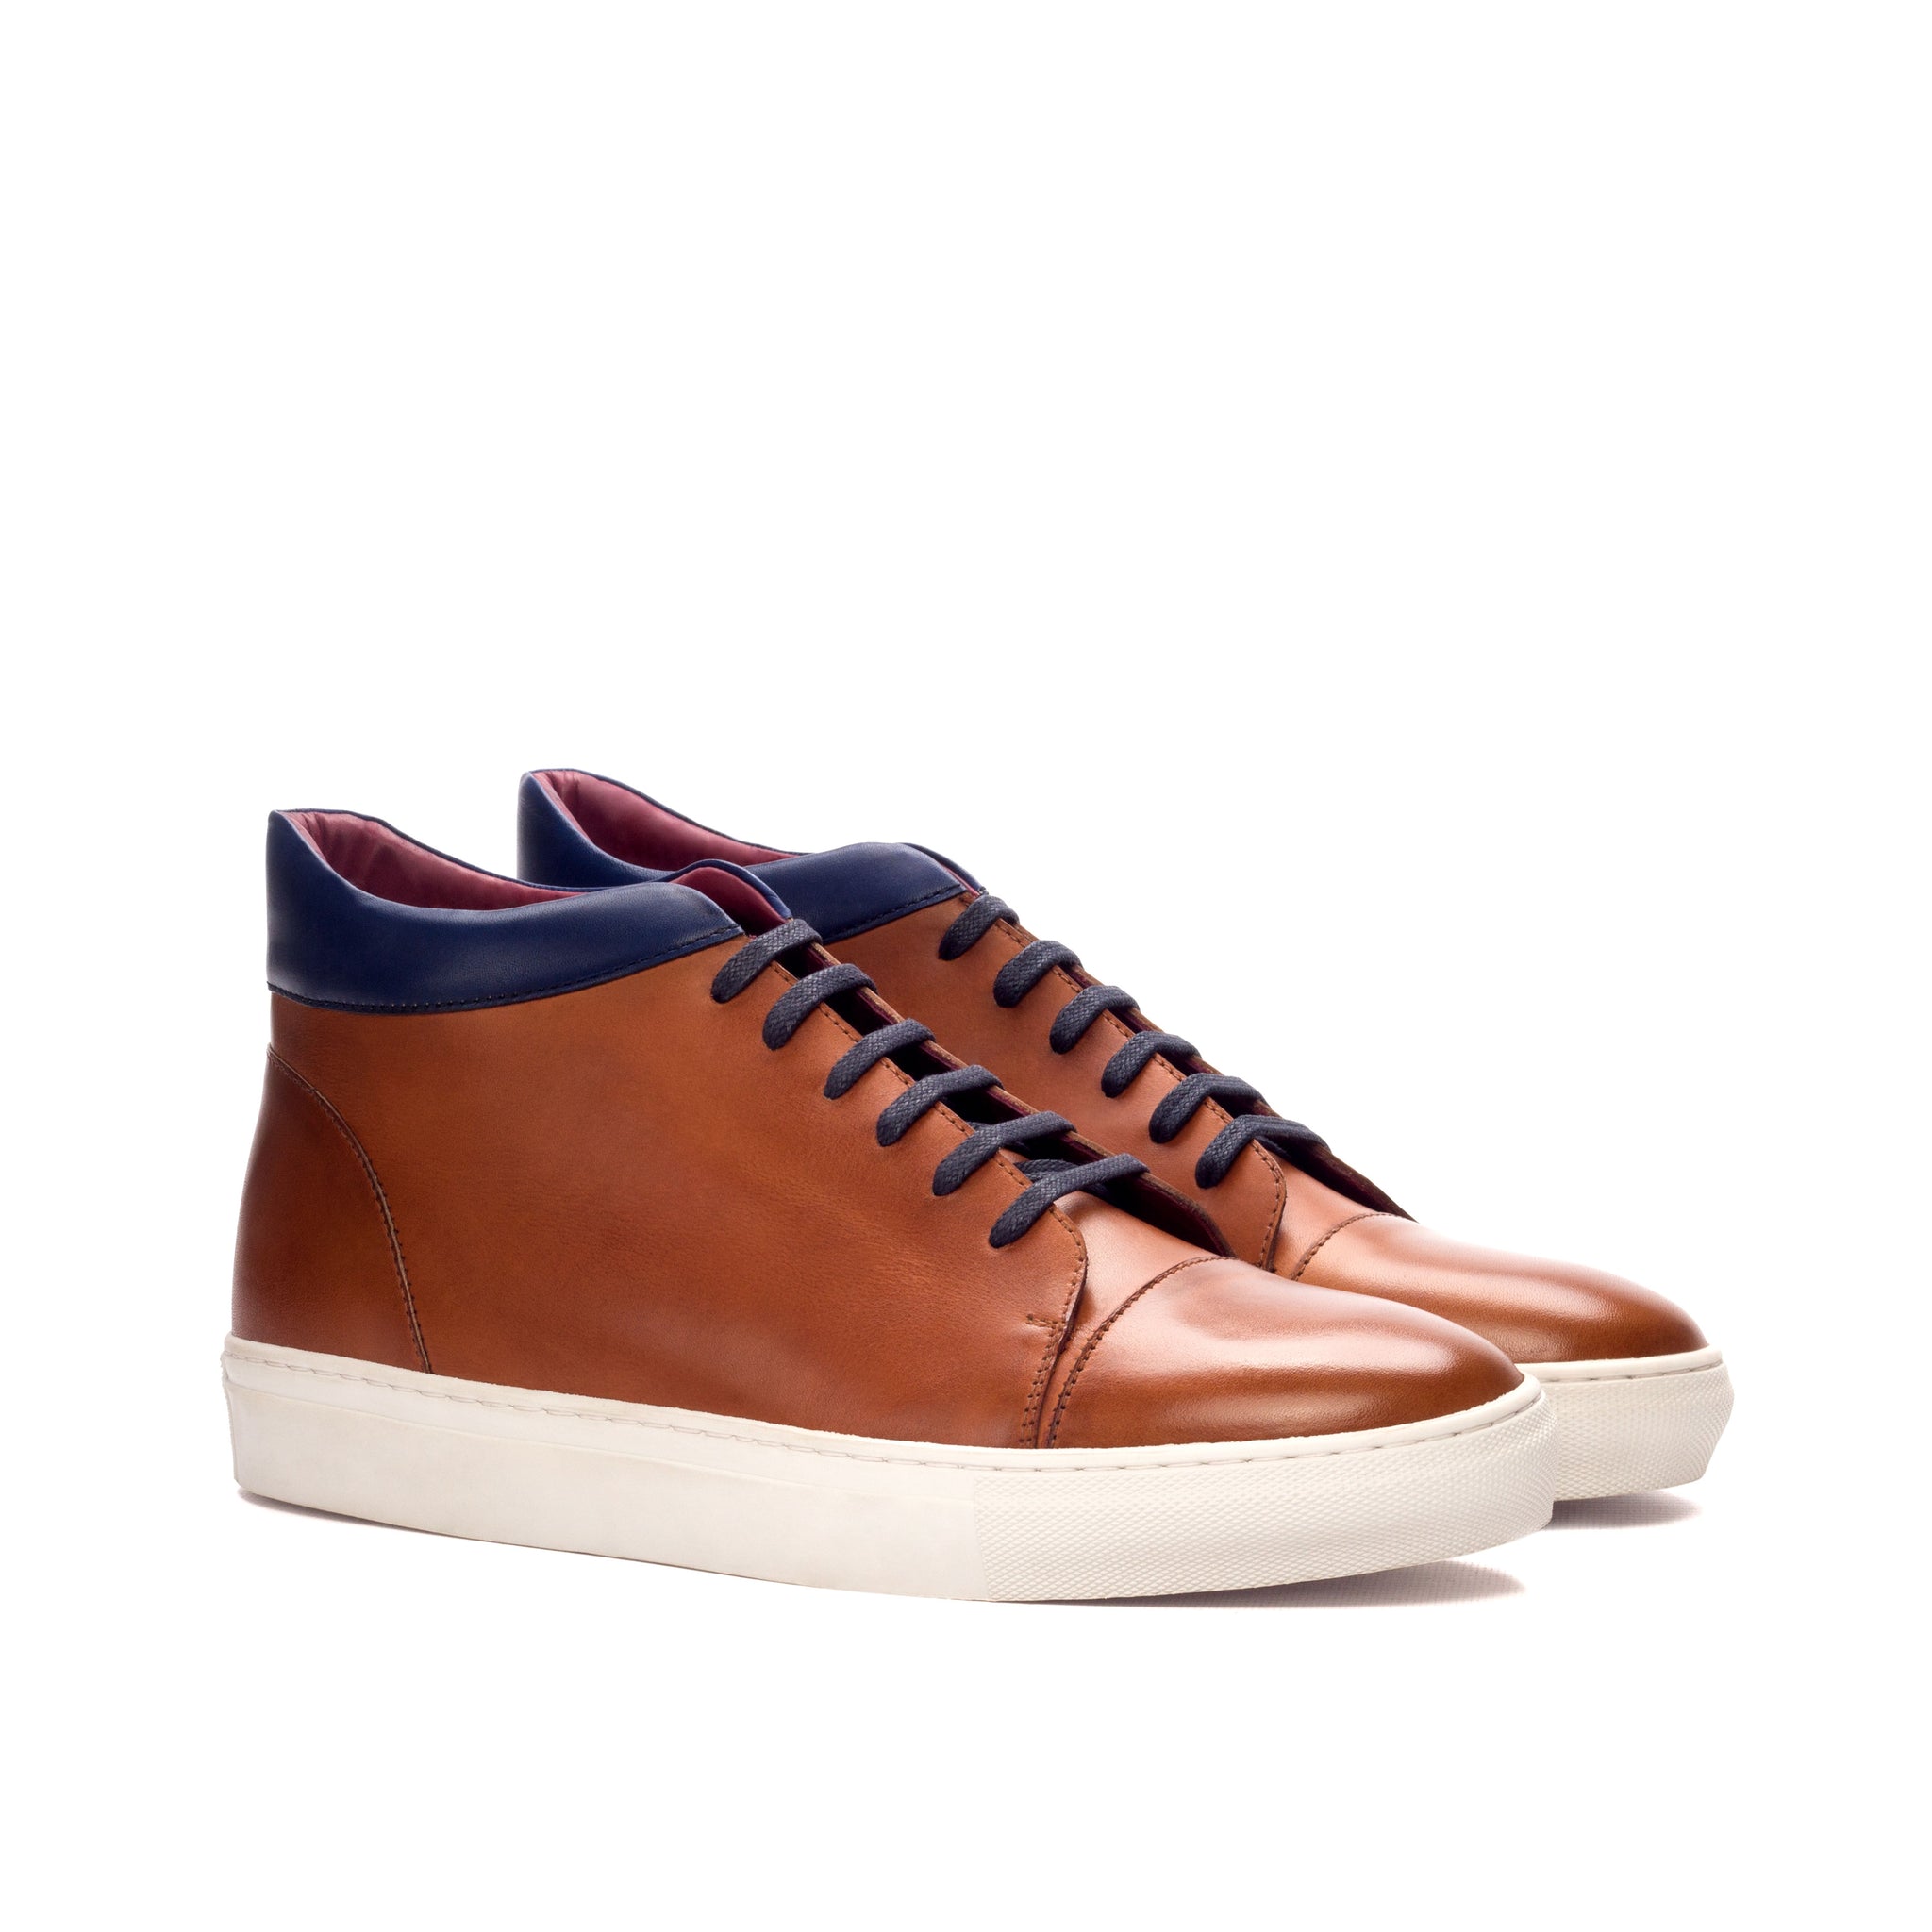 Unique Handcrafted High Top Sneaker - Painted Calf Cognac-Painted Calf Navy